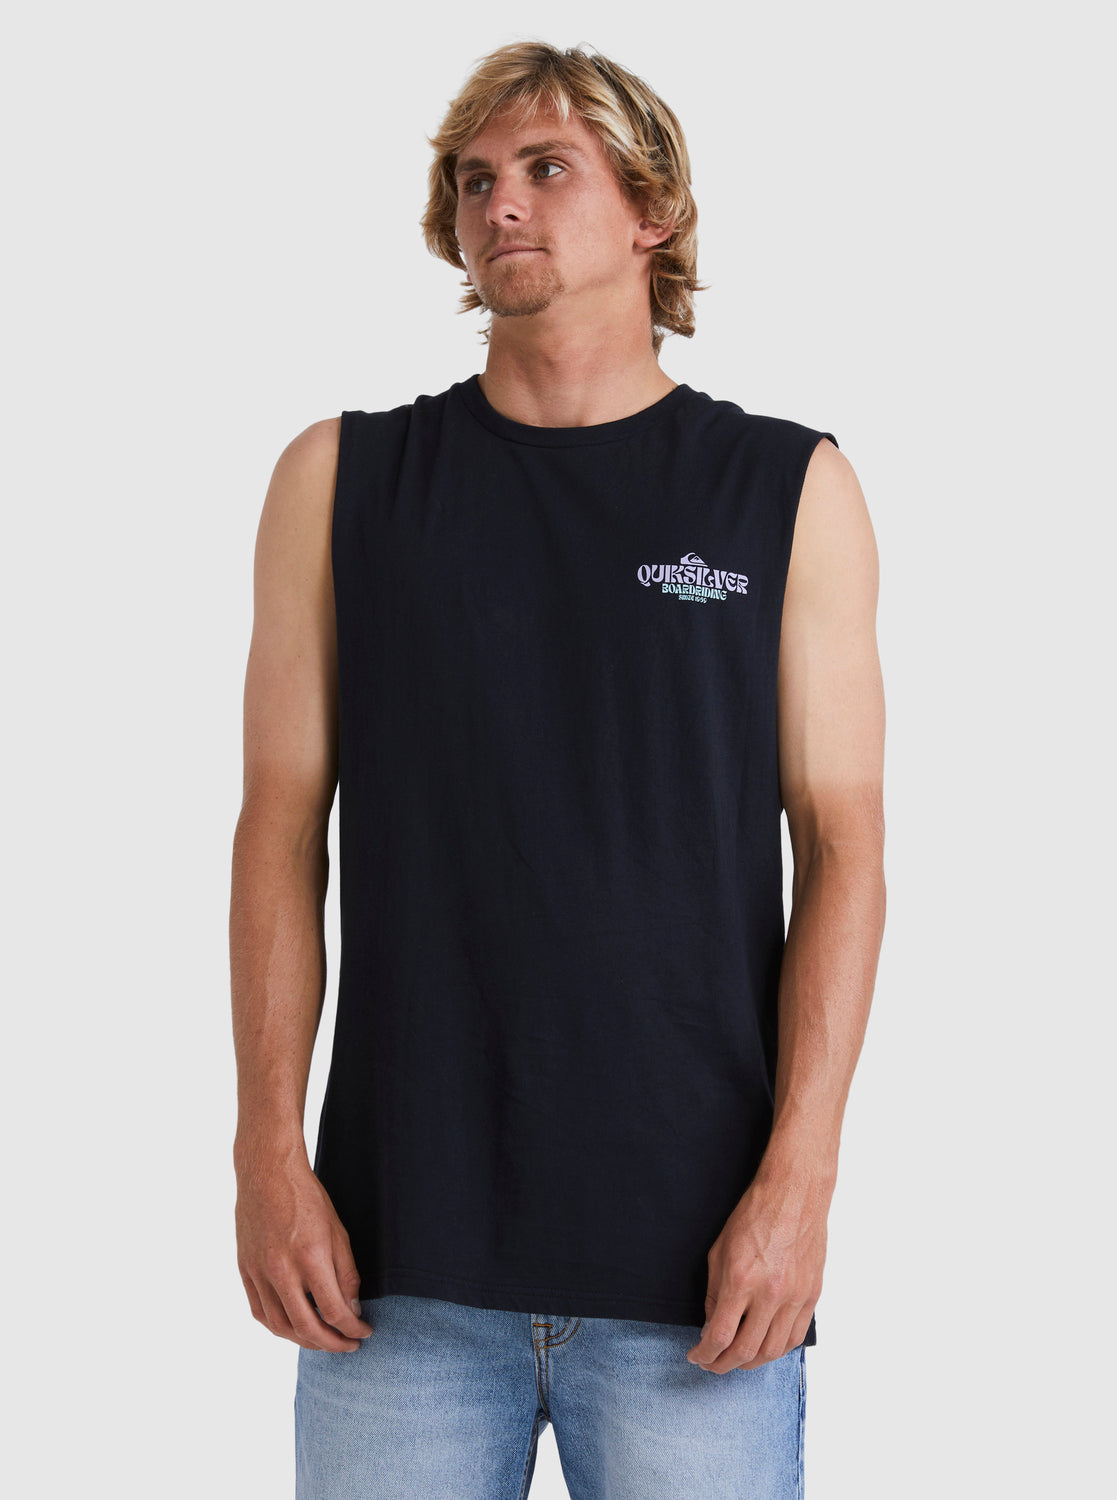 Quiksilver Bold Move Muscle Tee in black colourway from front